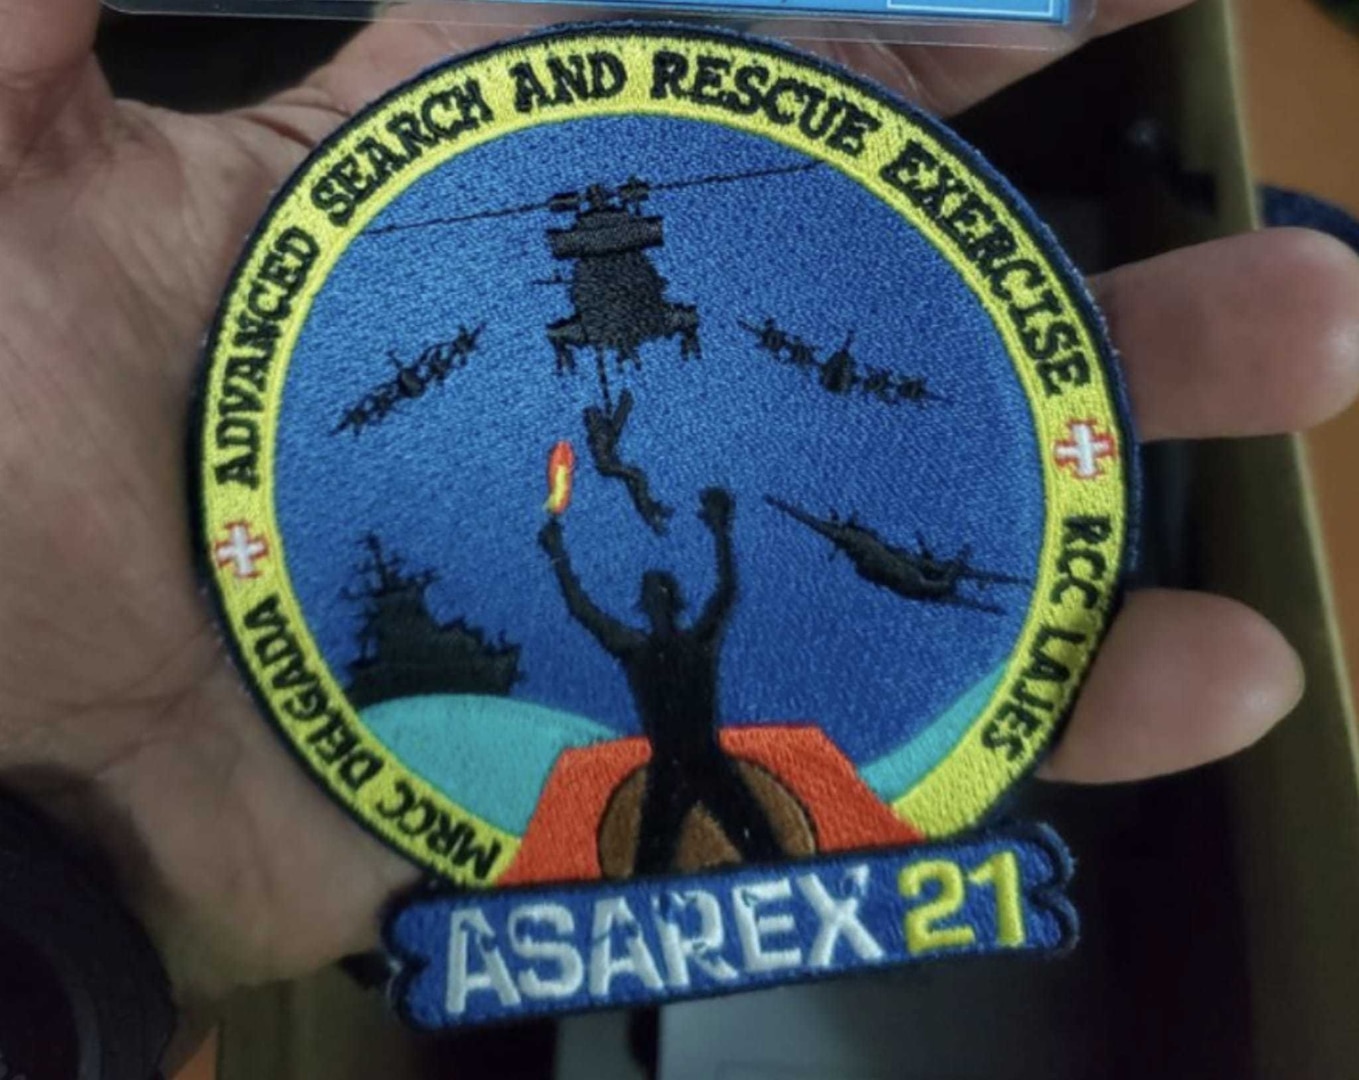 An Airman displays the patch awarded to those participating in ASAREX 2021, a NATO search and rescue exercise hosted by the Portuguese Air Force in the Azores at the end of July 2021. The New York Air National Guard’s 106th Rescue Wing  participated in the training.